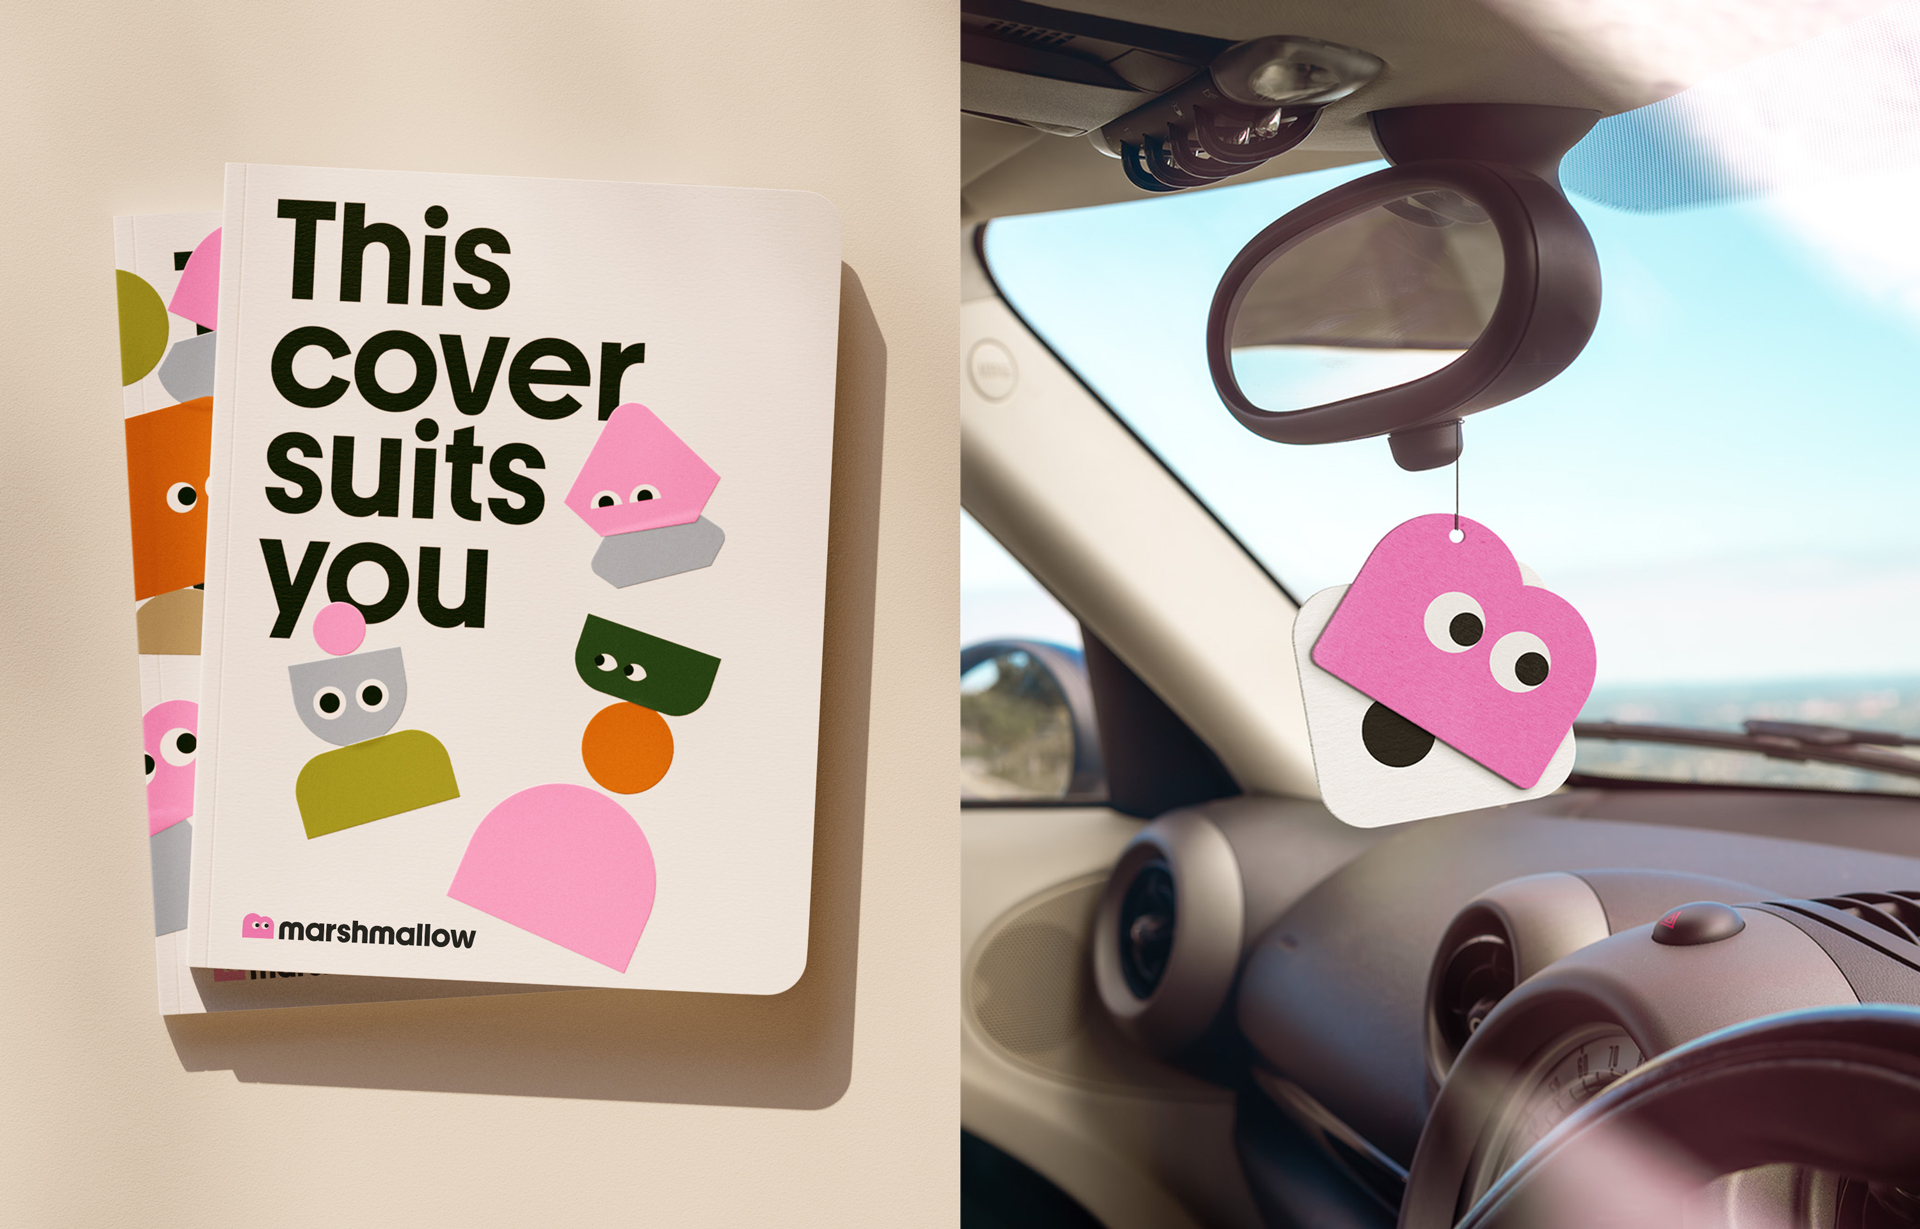 Marshmallow rebrand on stickers and air freshener